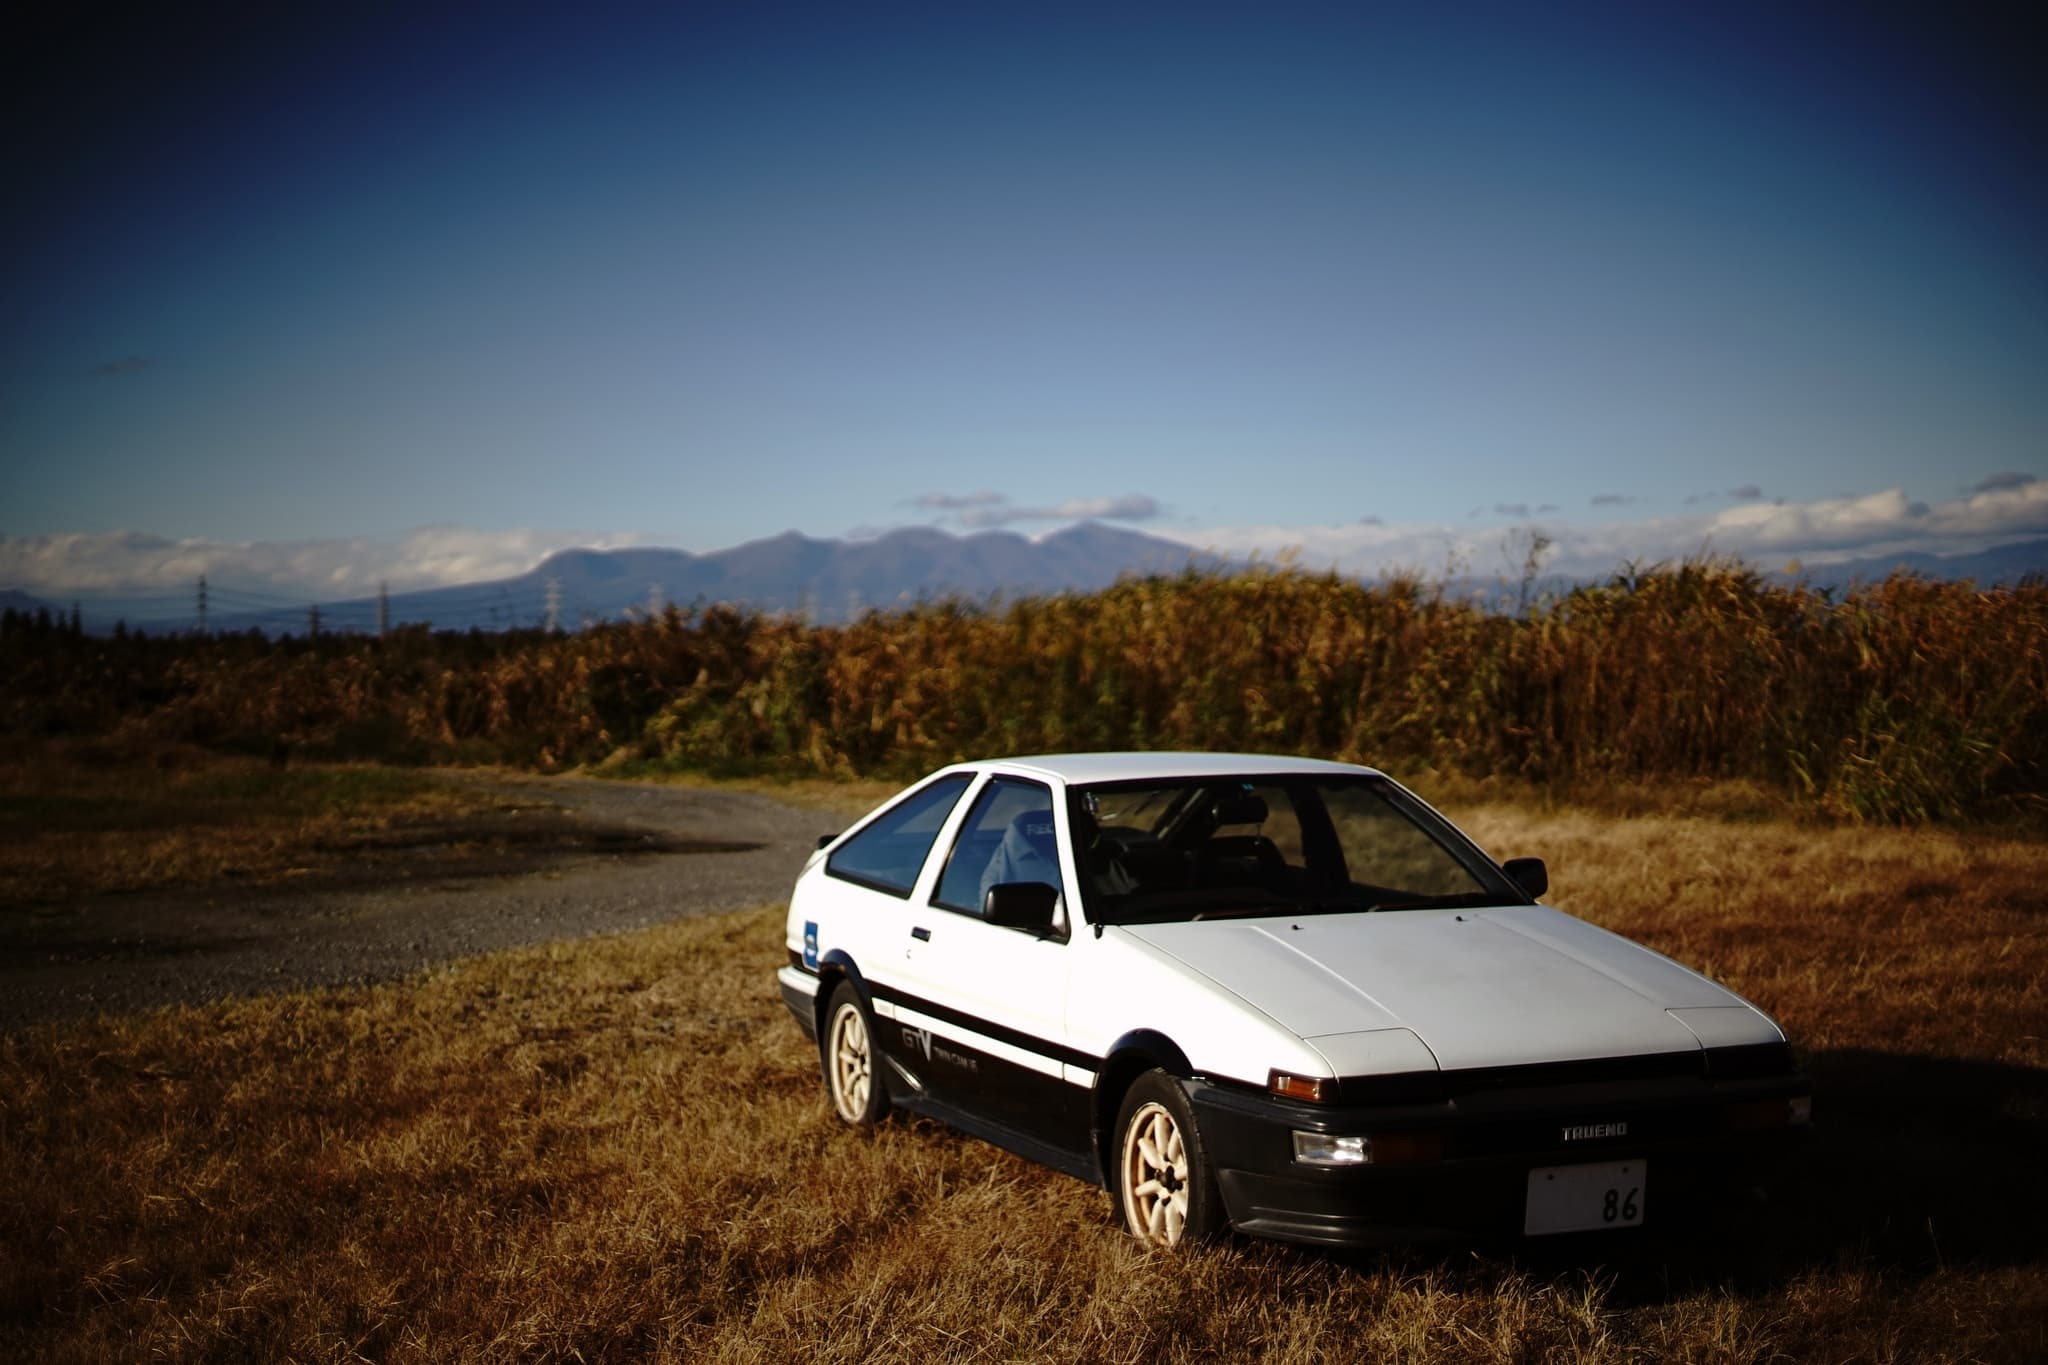 Free download Toyota Corolla AE86 wallpaper HD High Resolution [2048x1365] for your Desktop, Mobile & Tablet. Explore Toyota 86 Wallpaper. Toyota Celica Wallpaper, F 86 Sabre Wallpaper, Toyota Tacoma Wallpaper